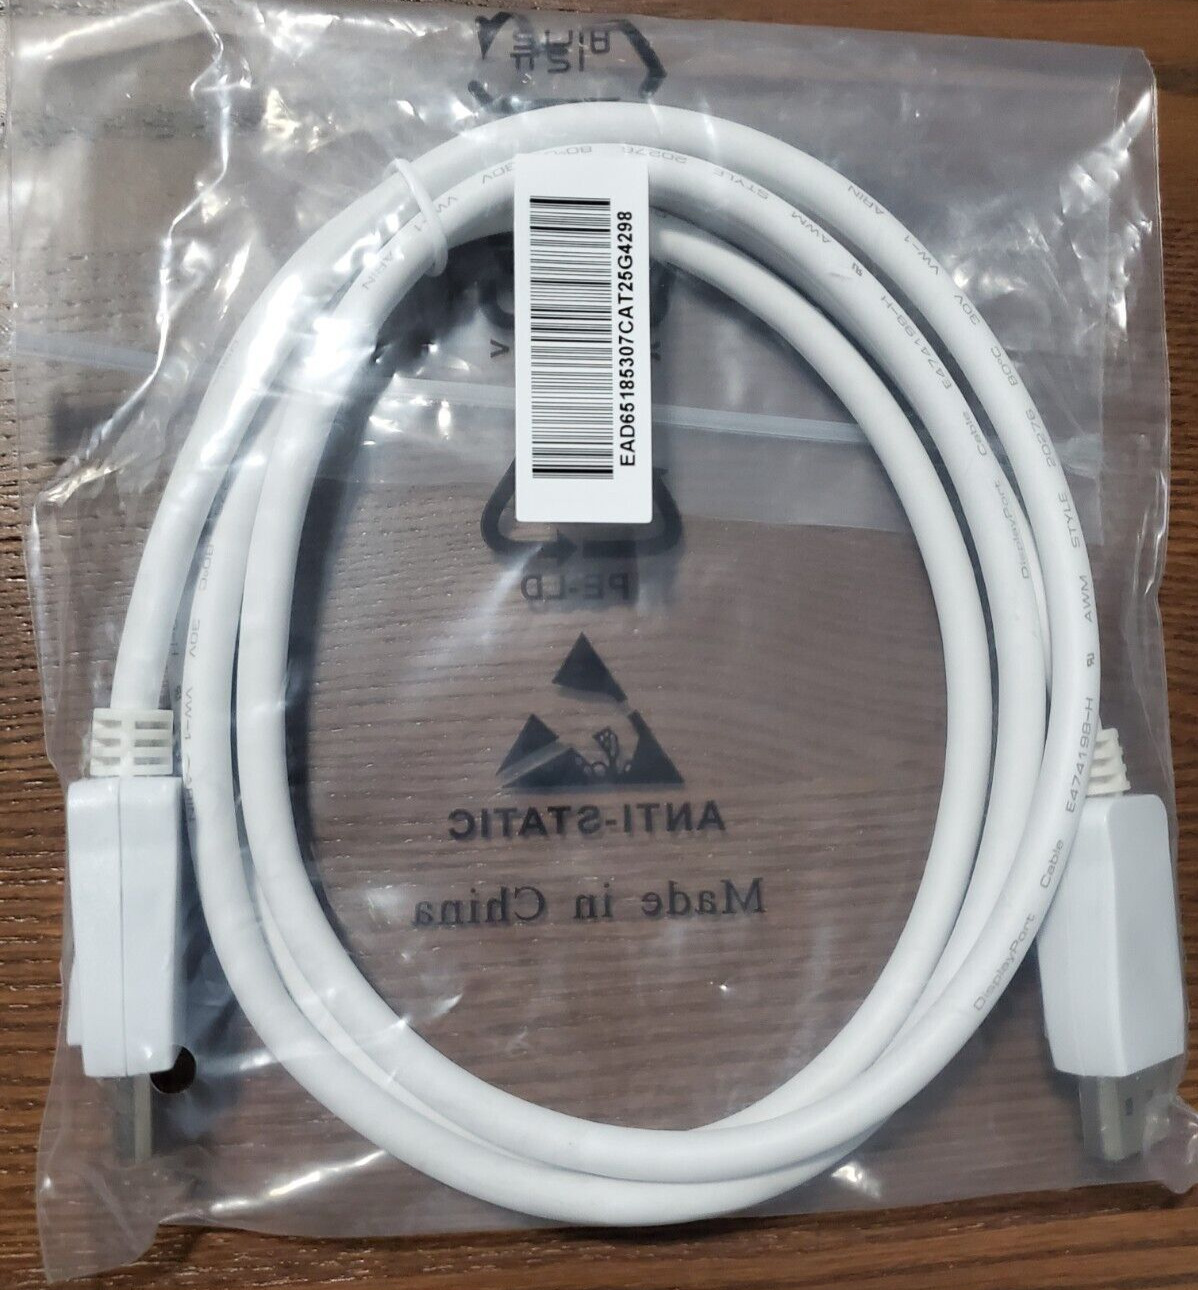 LG DisplayPort DP White Cable EAD65185307 - NEW IN BAG - 